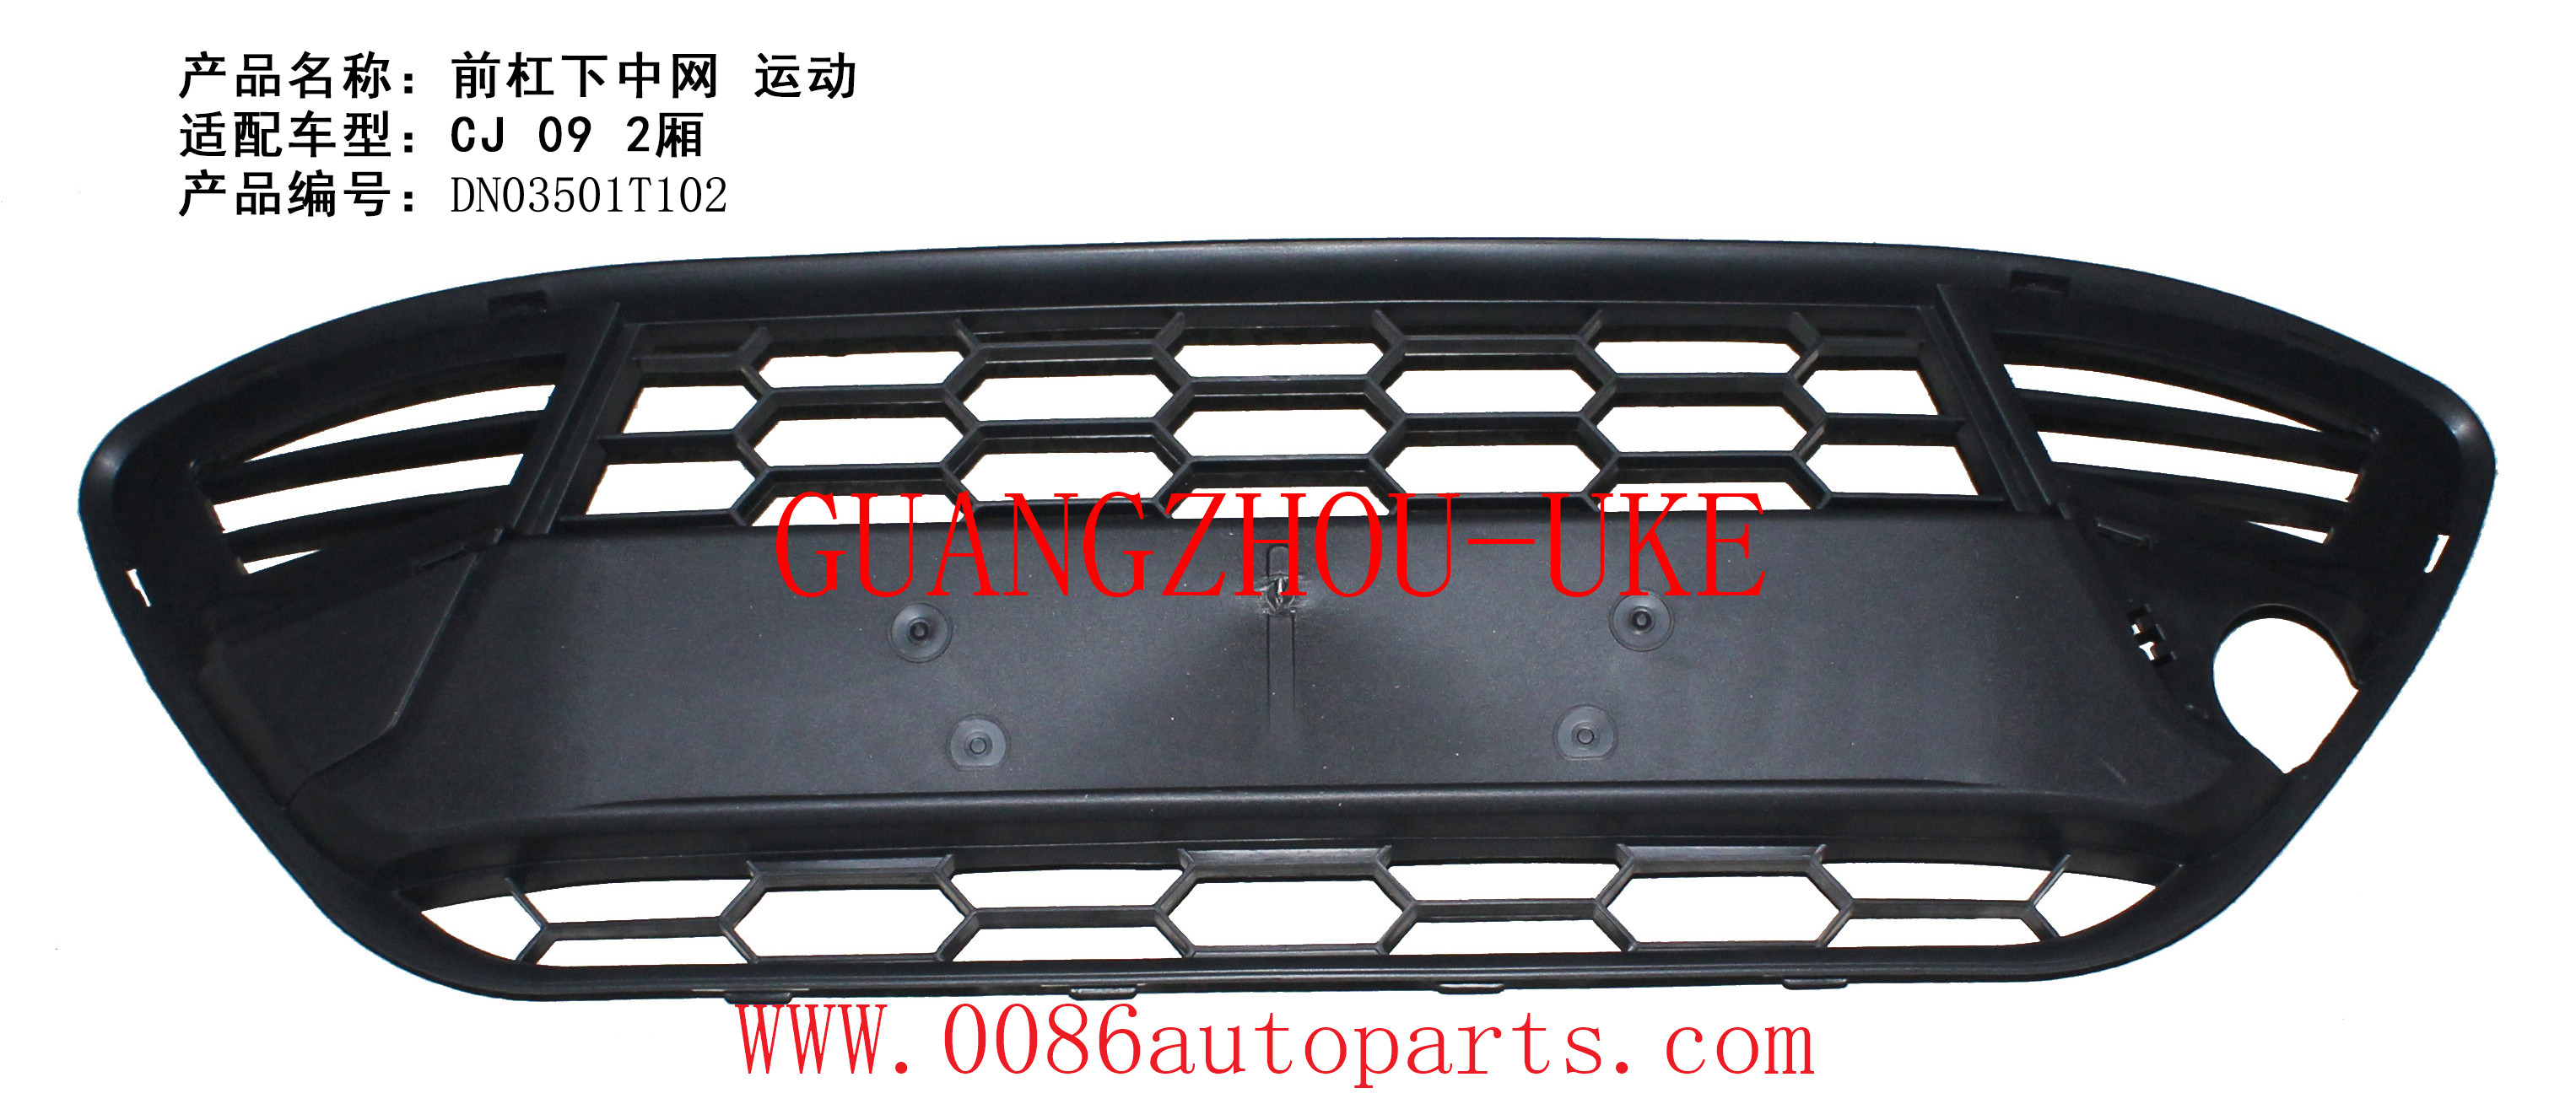 FRONT BUMPER LOWER GRILL SPORT   -   DN03501T102(图1)